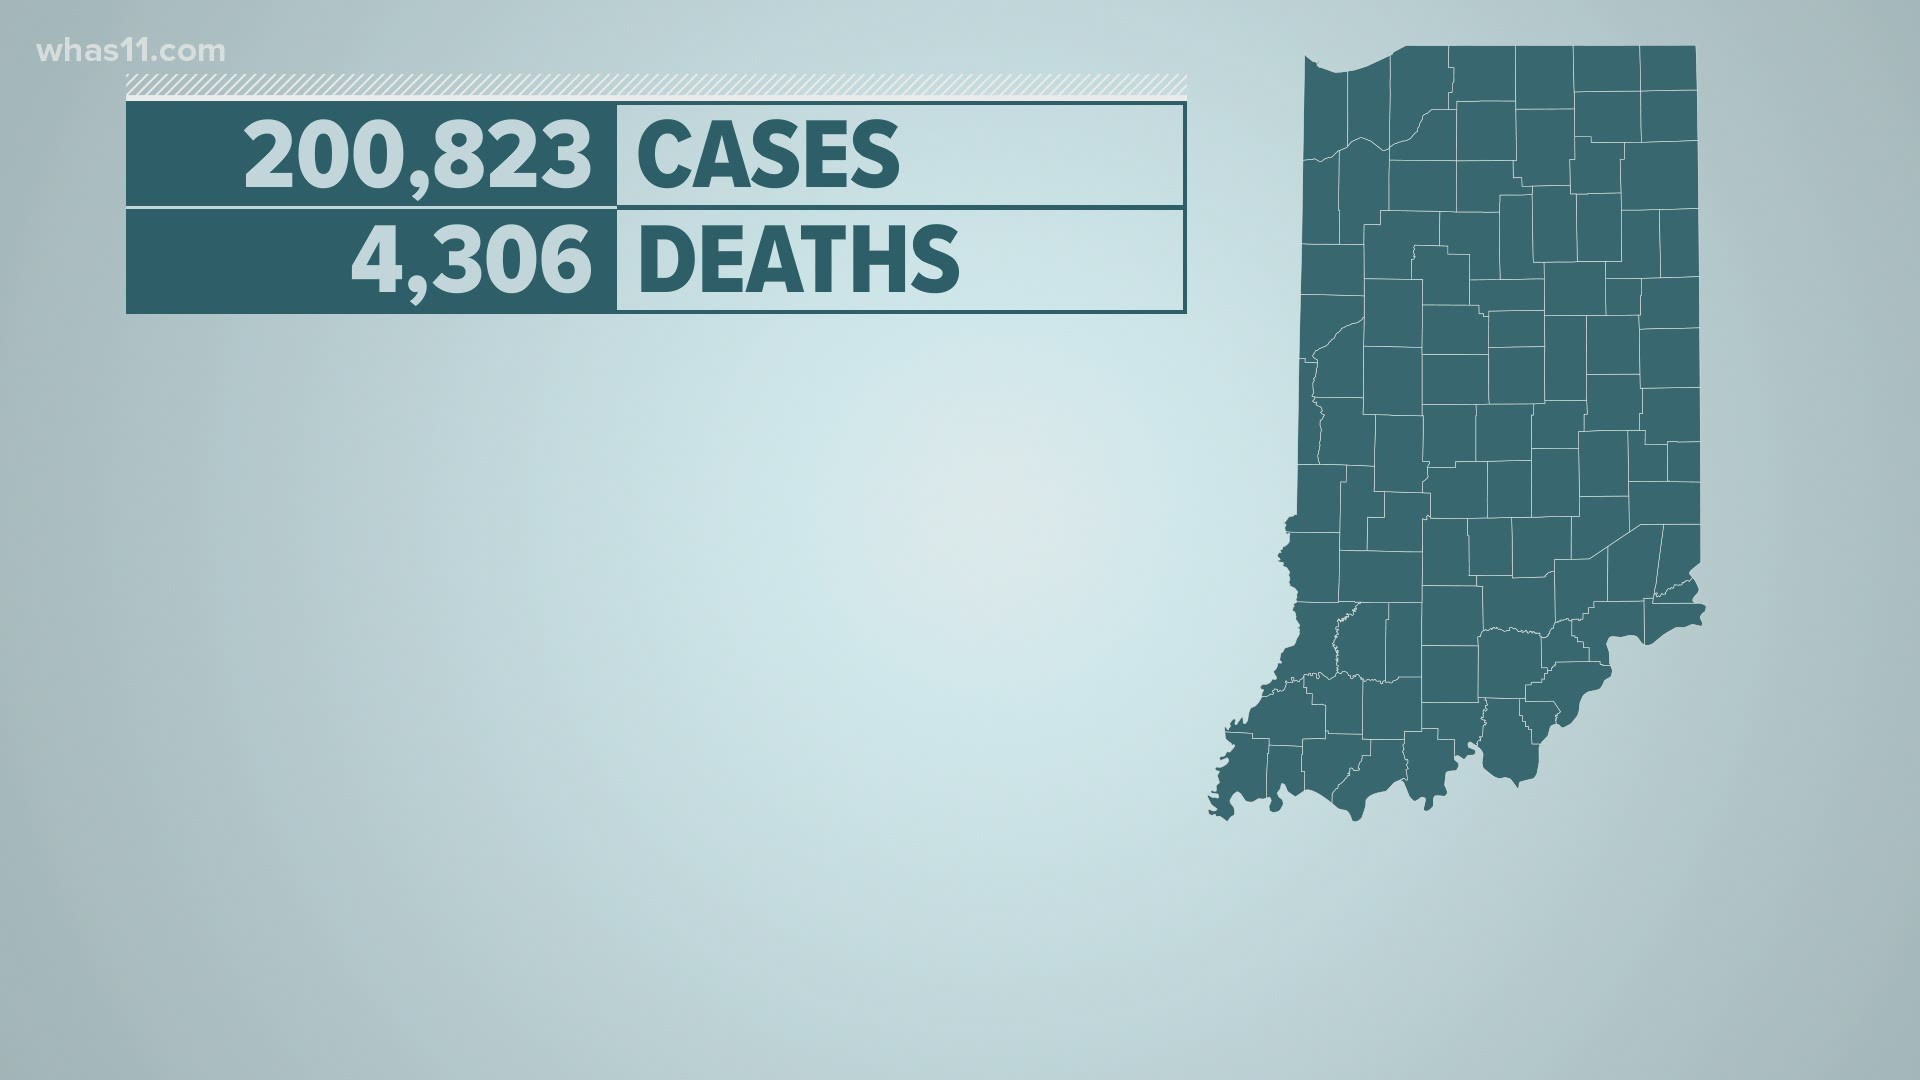 Indiana has surpassed 200,000 cases of COVID-19 after another record-setting day of new cases reported.